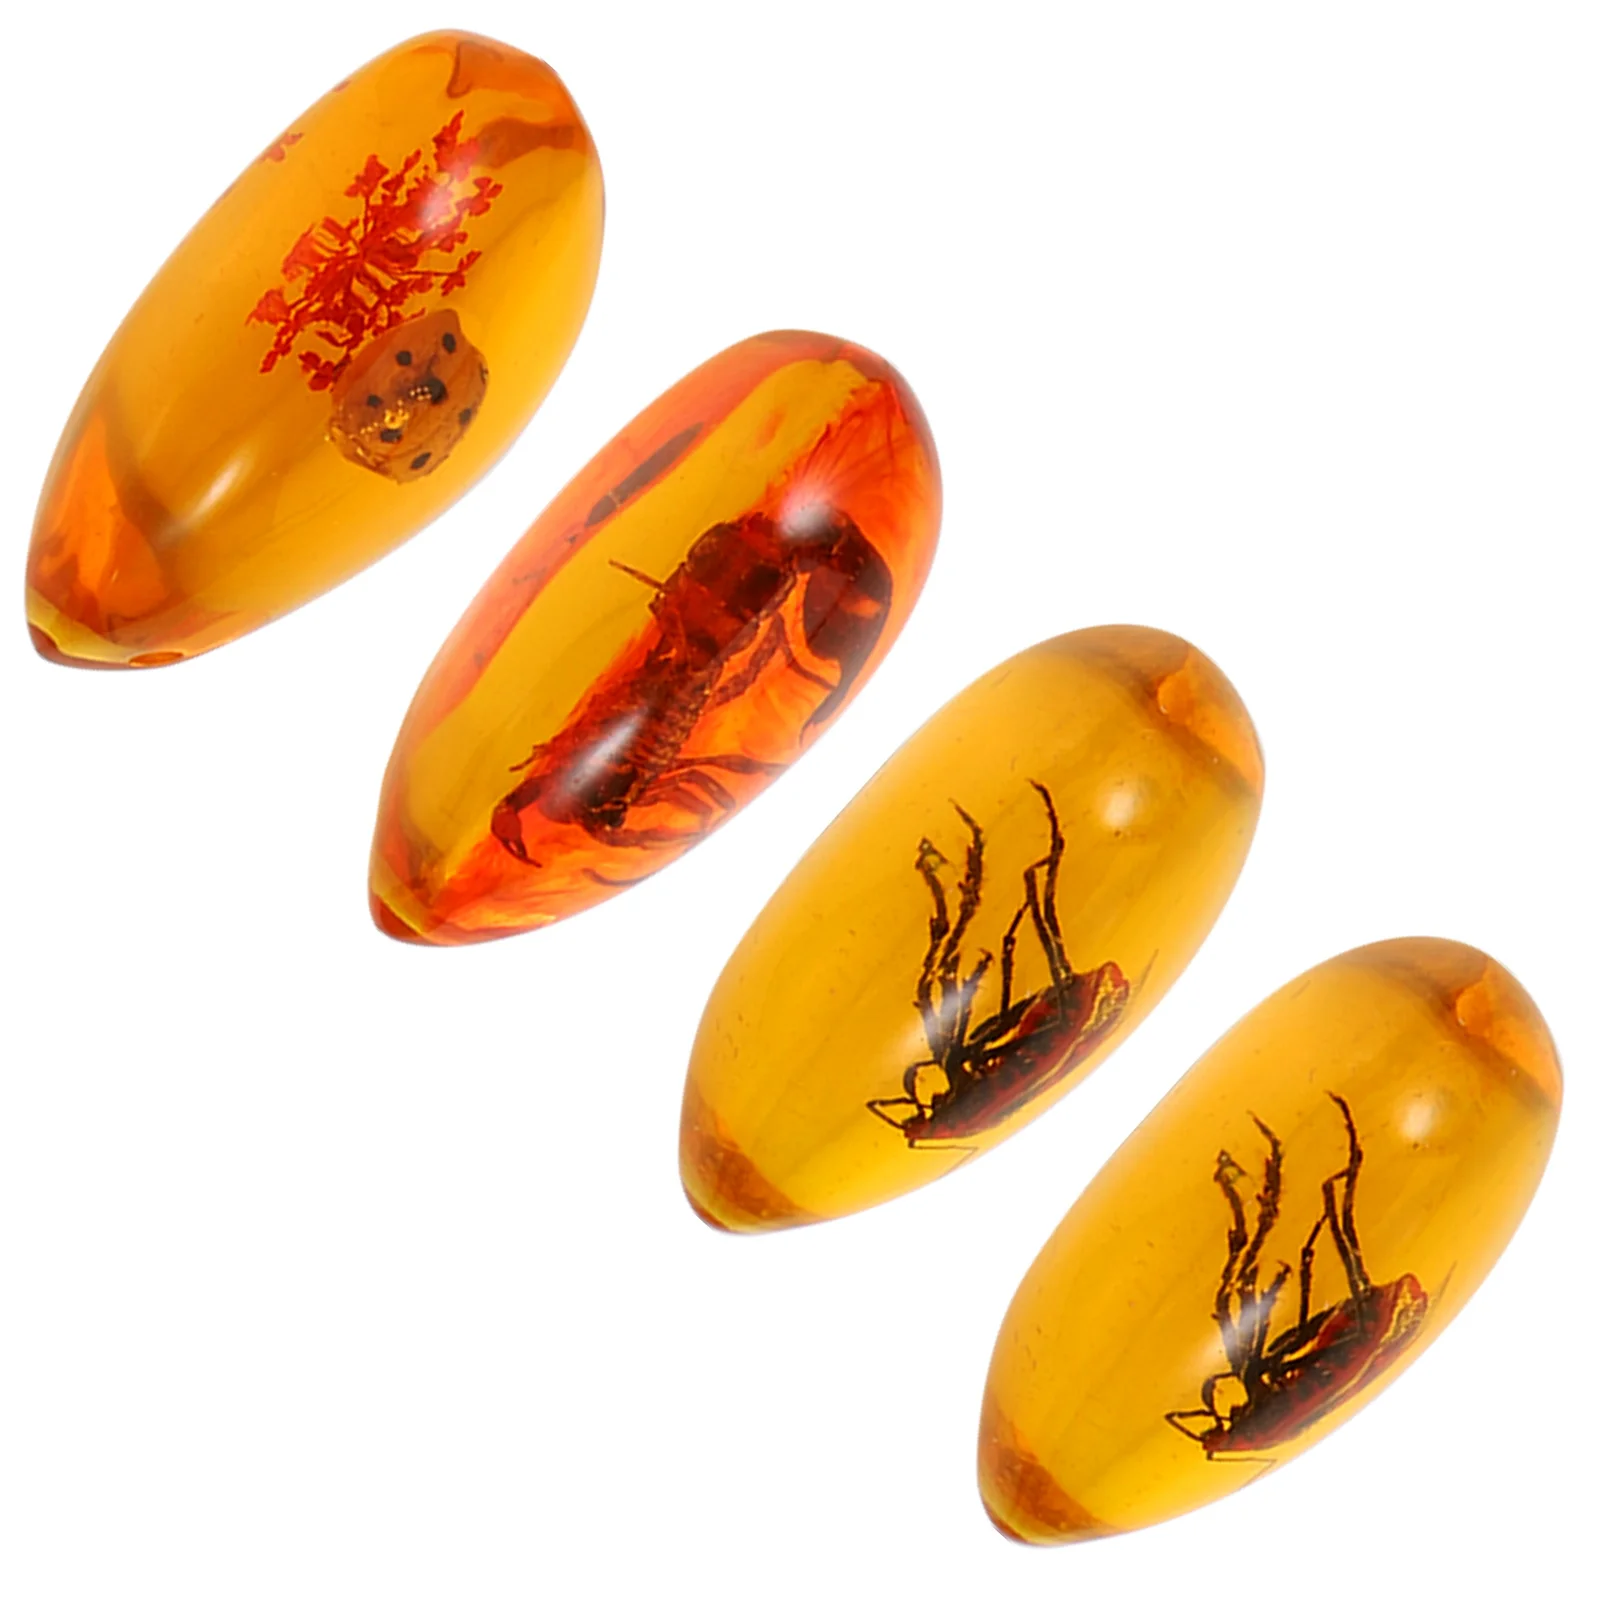 

4 Pcs Insect Amber Decoration Insects Pendants Bathroom Decorations for DIY Specimen with Crafting Resin Ornament Crafts